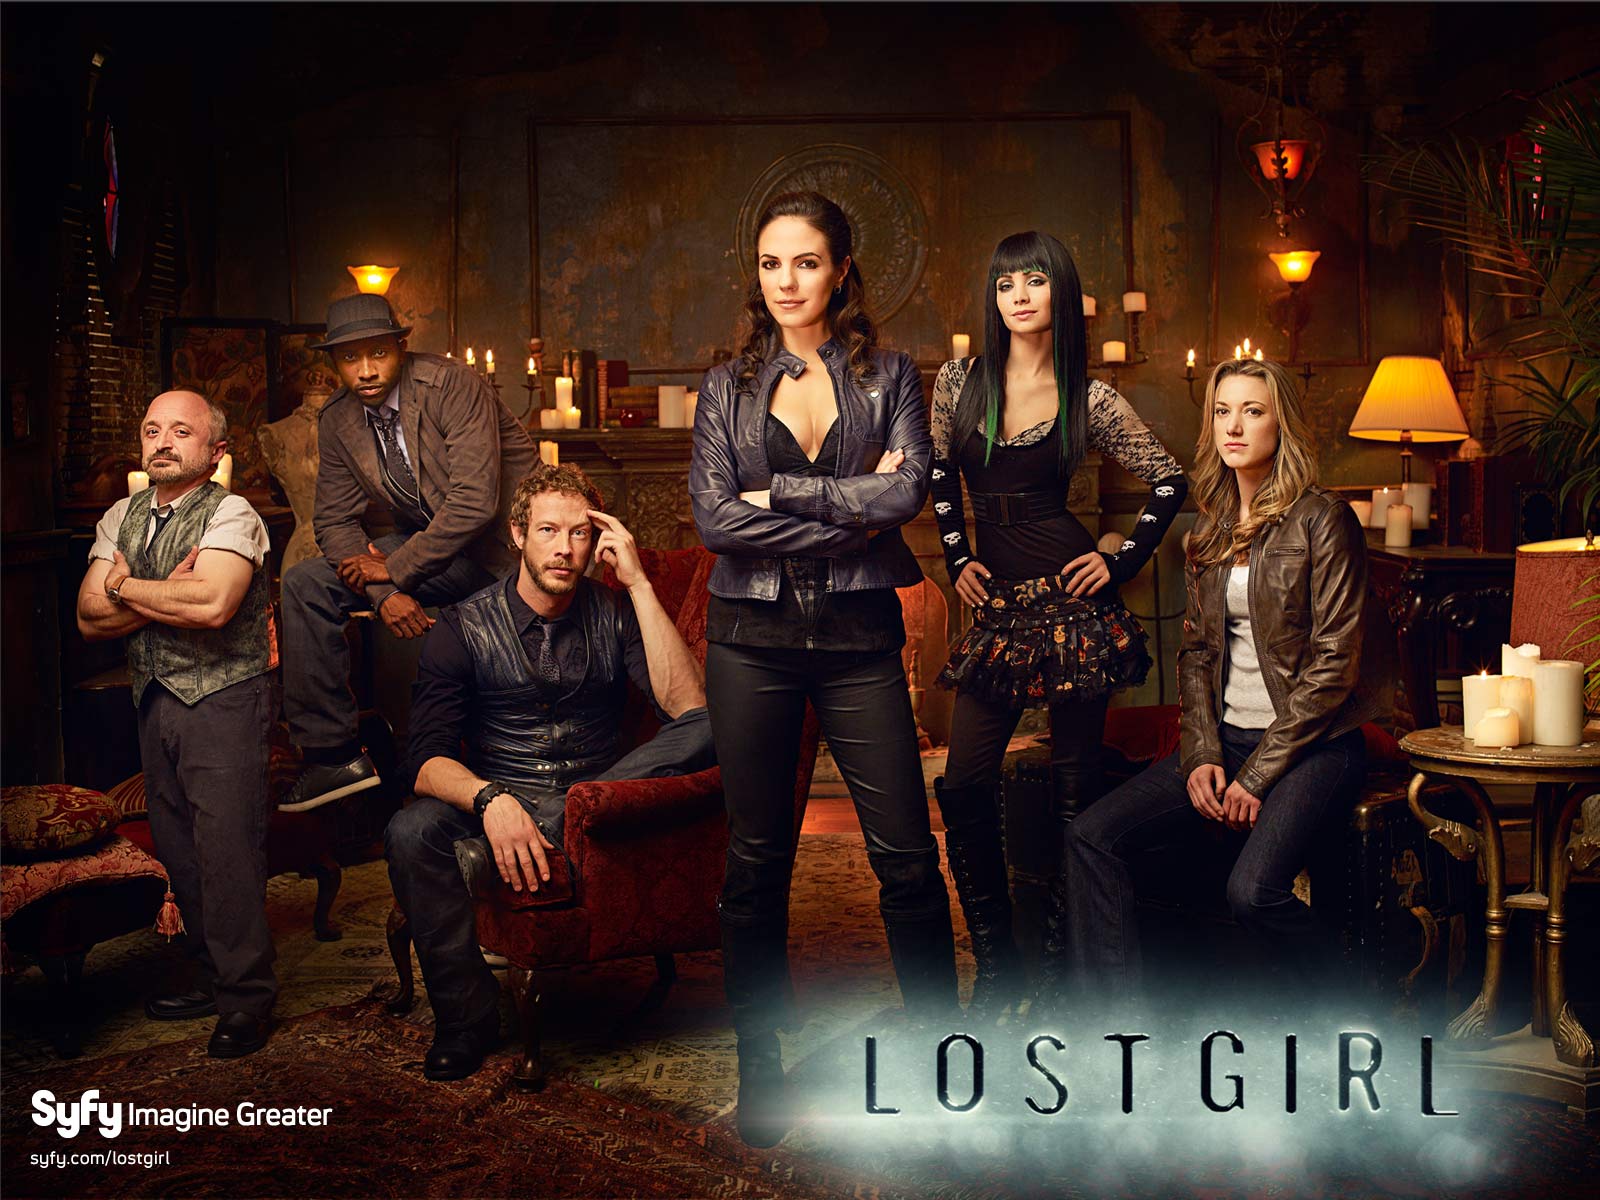 Lost Girl Show Quotes Quotesgram Images, Photos, Reviews